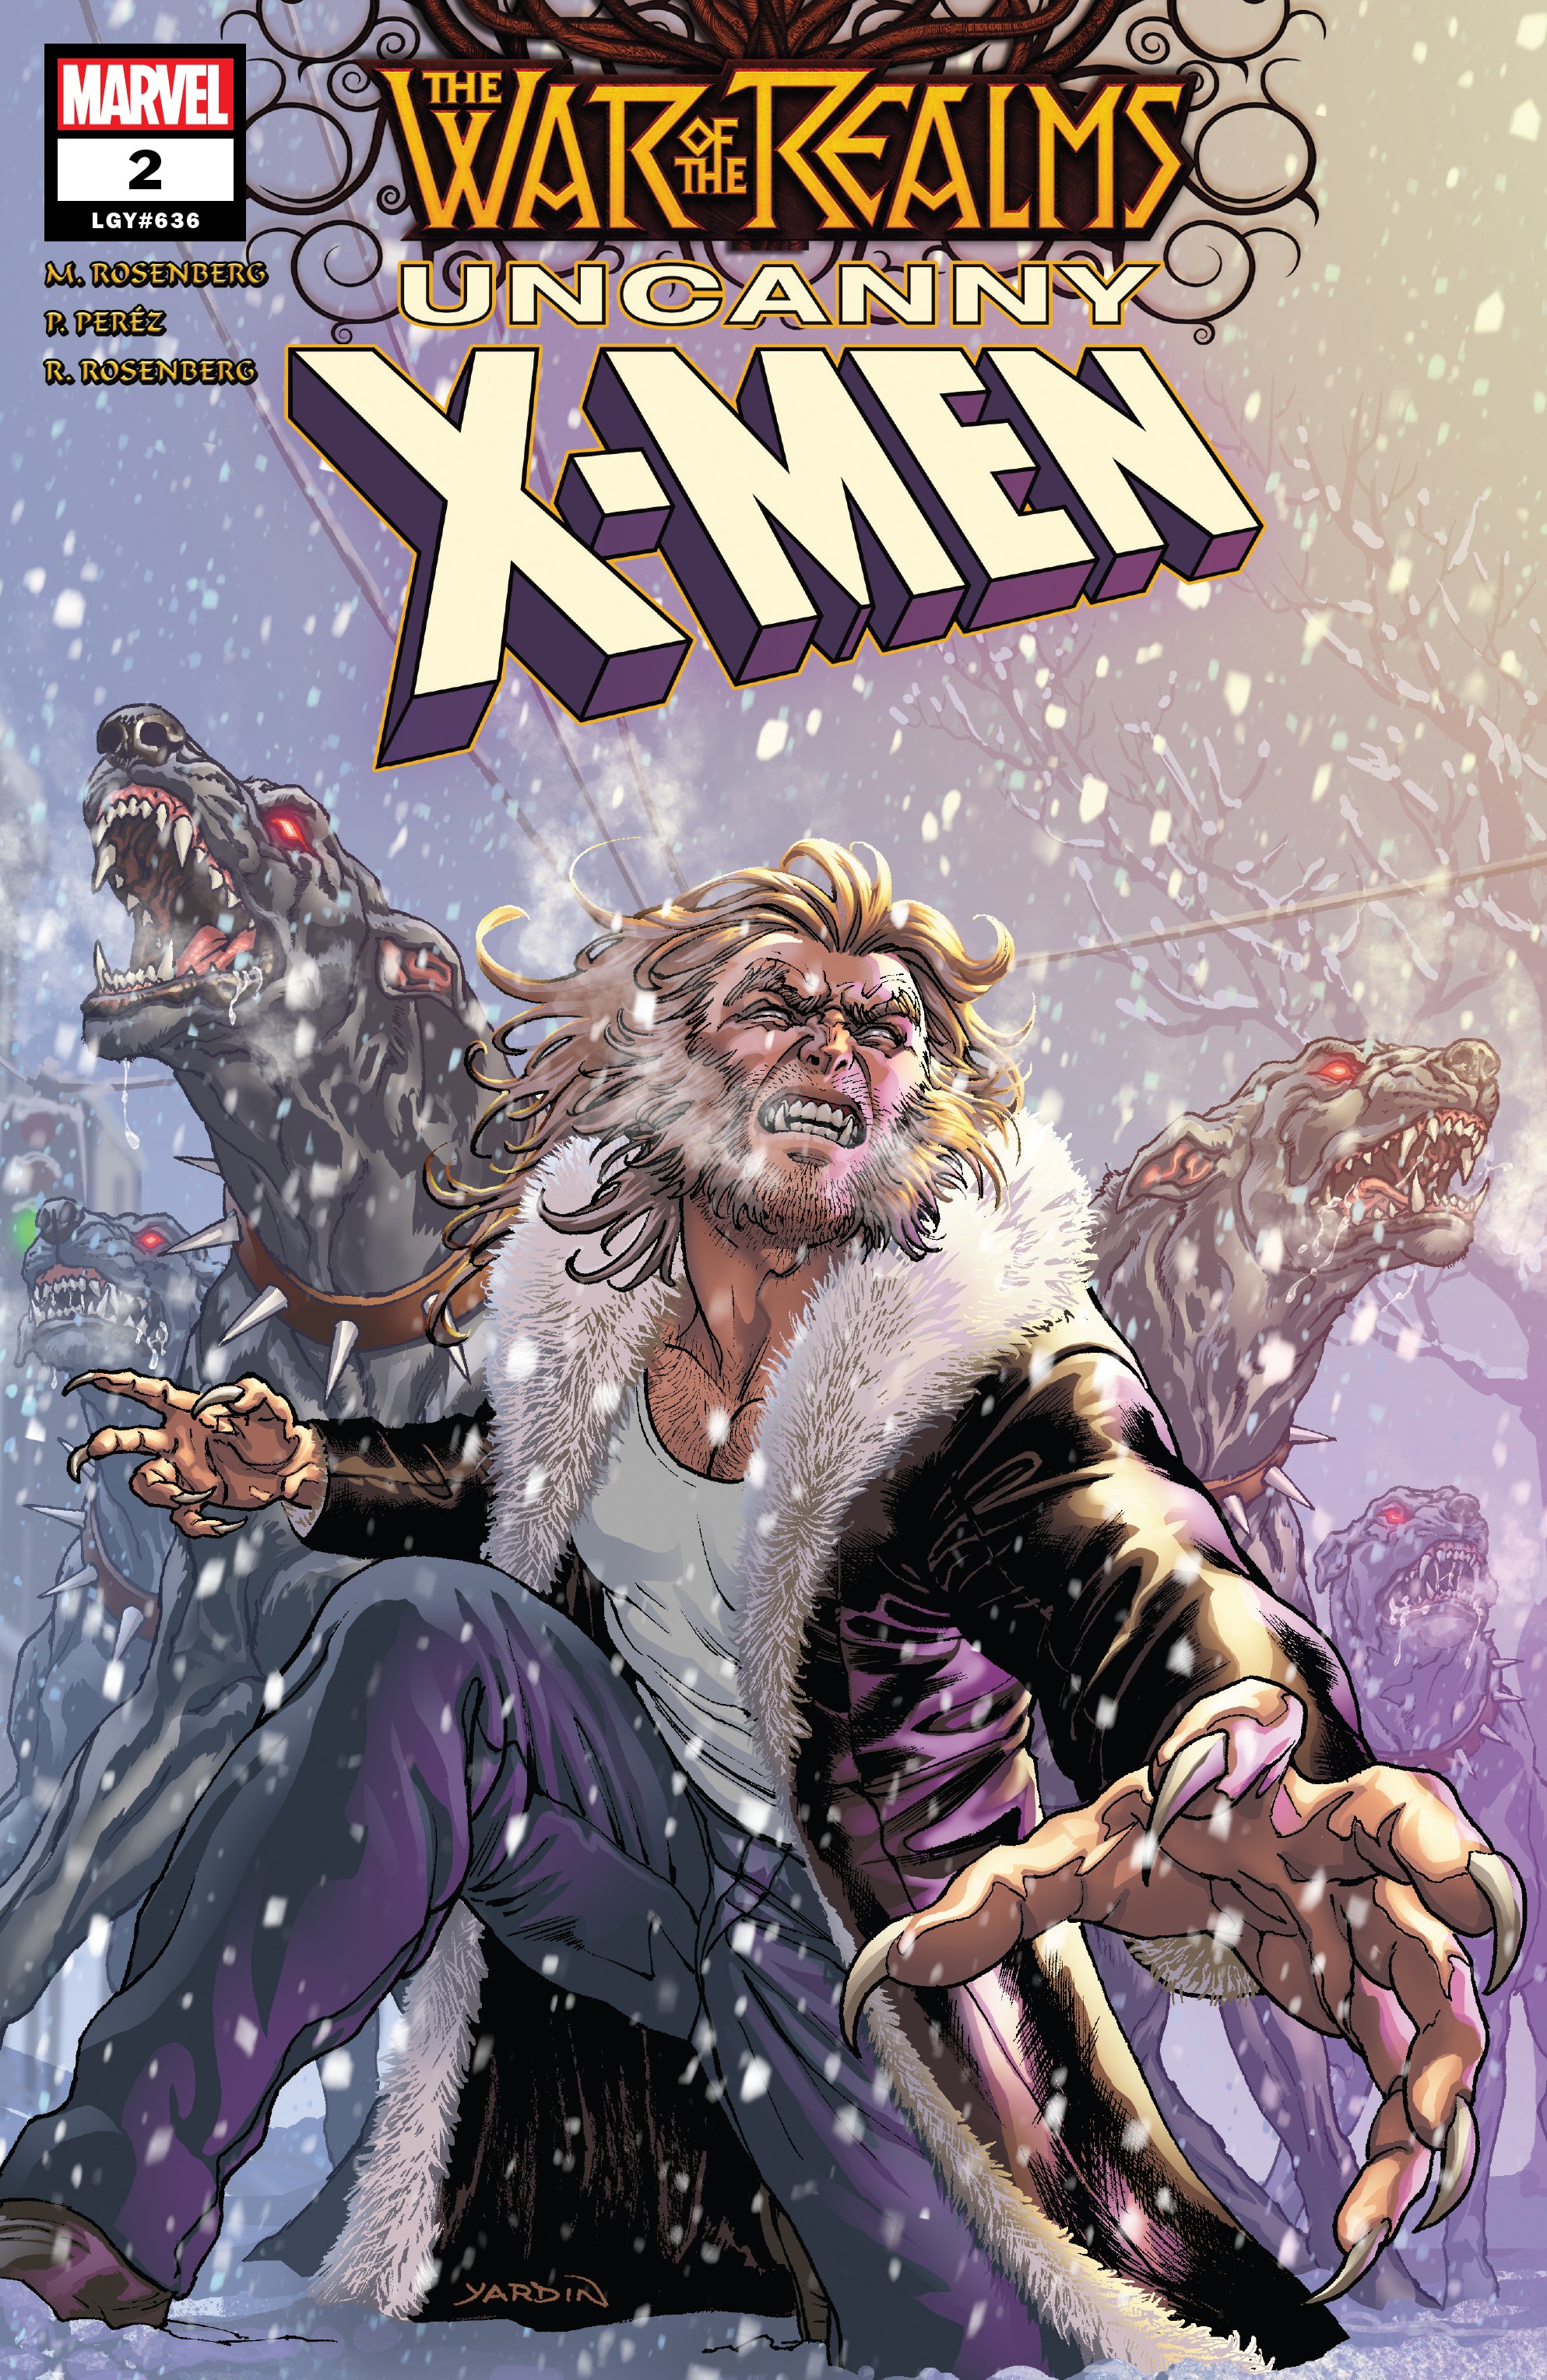 Read online War of the Realms: Uncanny X-Men comic -  Issue #2 - 1